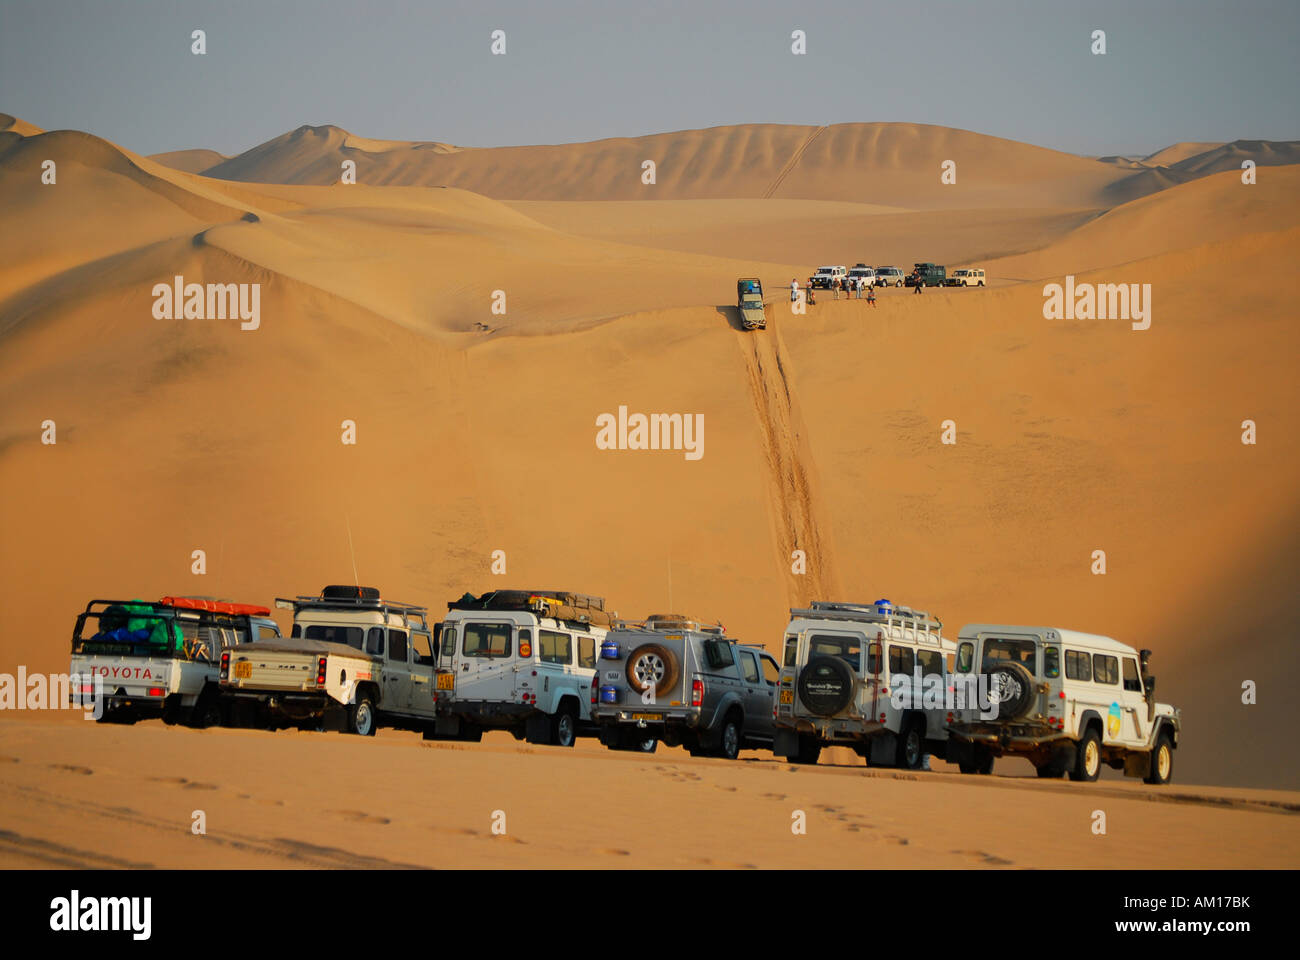 Jeeps in the dunes at Conception Bay, Diamond Area, Namibia Stock Photo